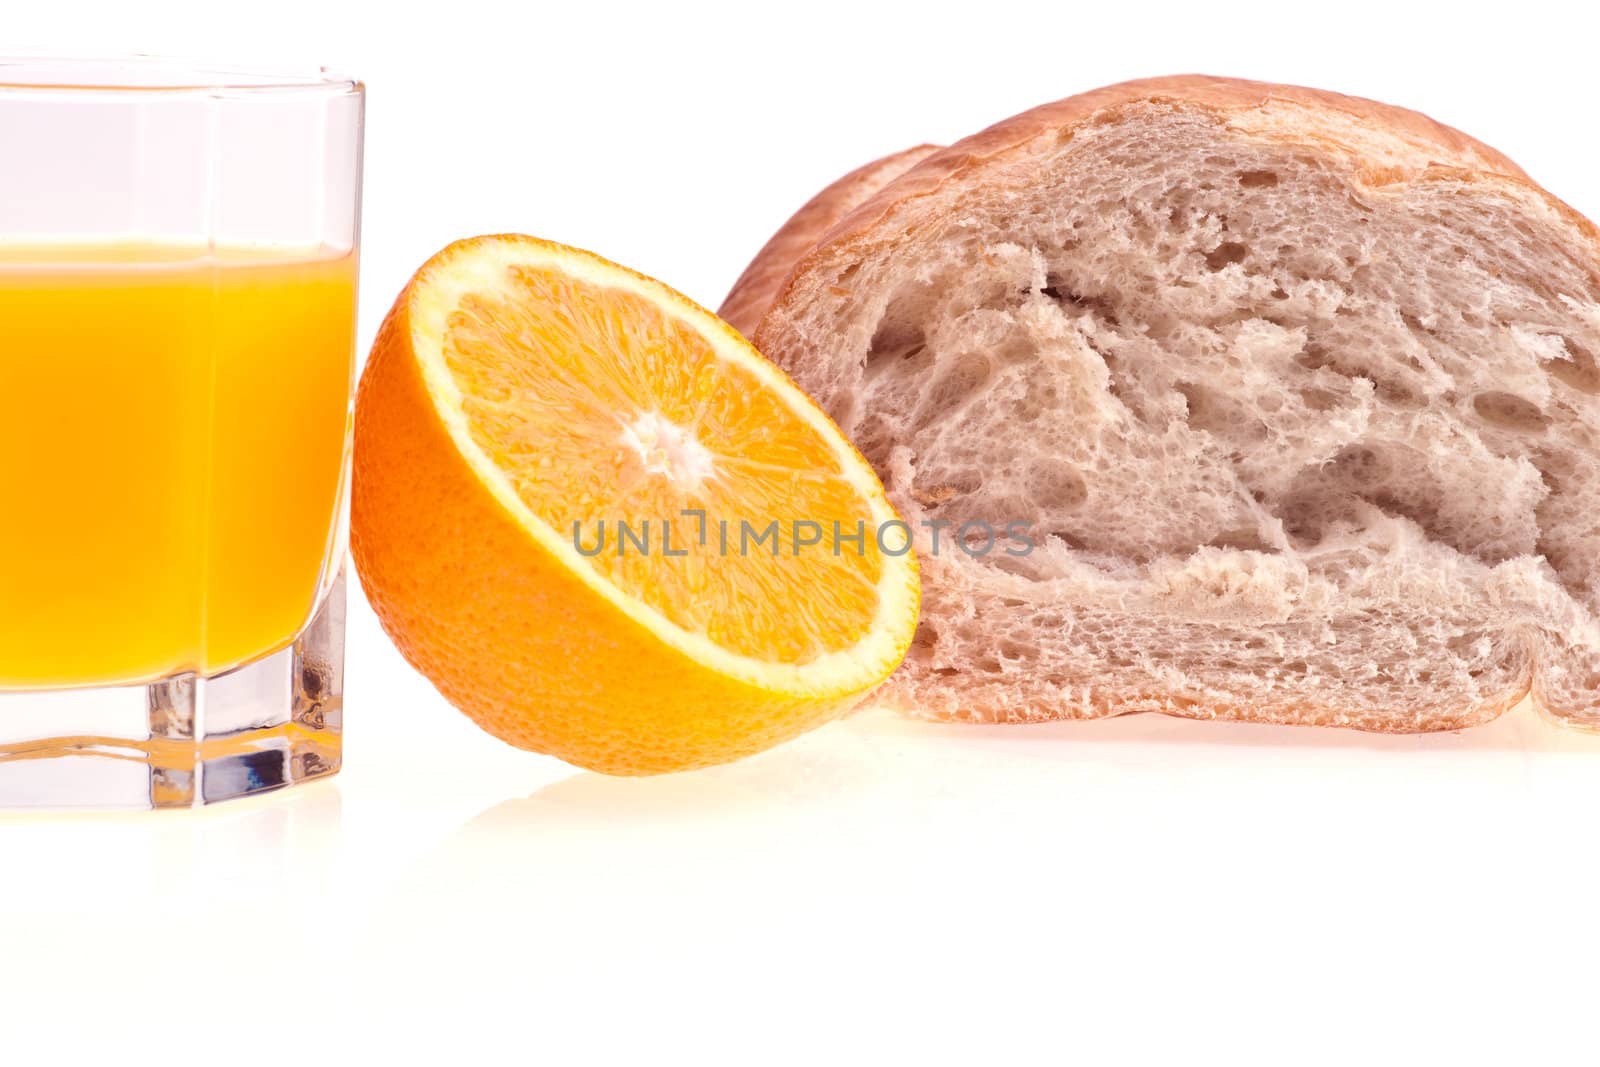 Bread, Orange and juice by Marcus